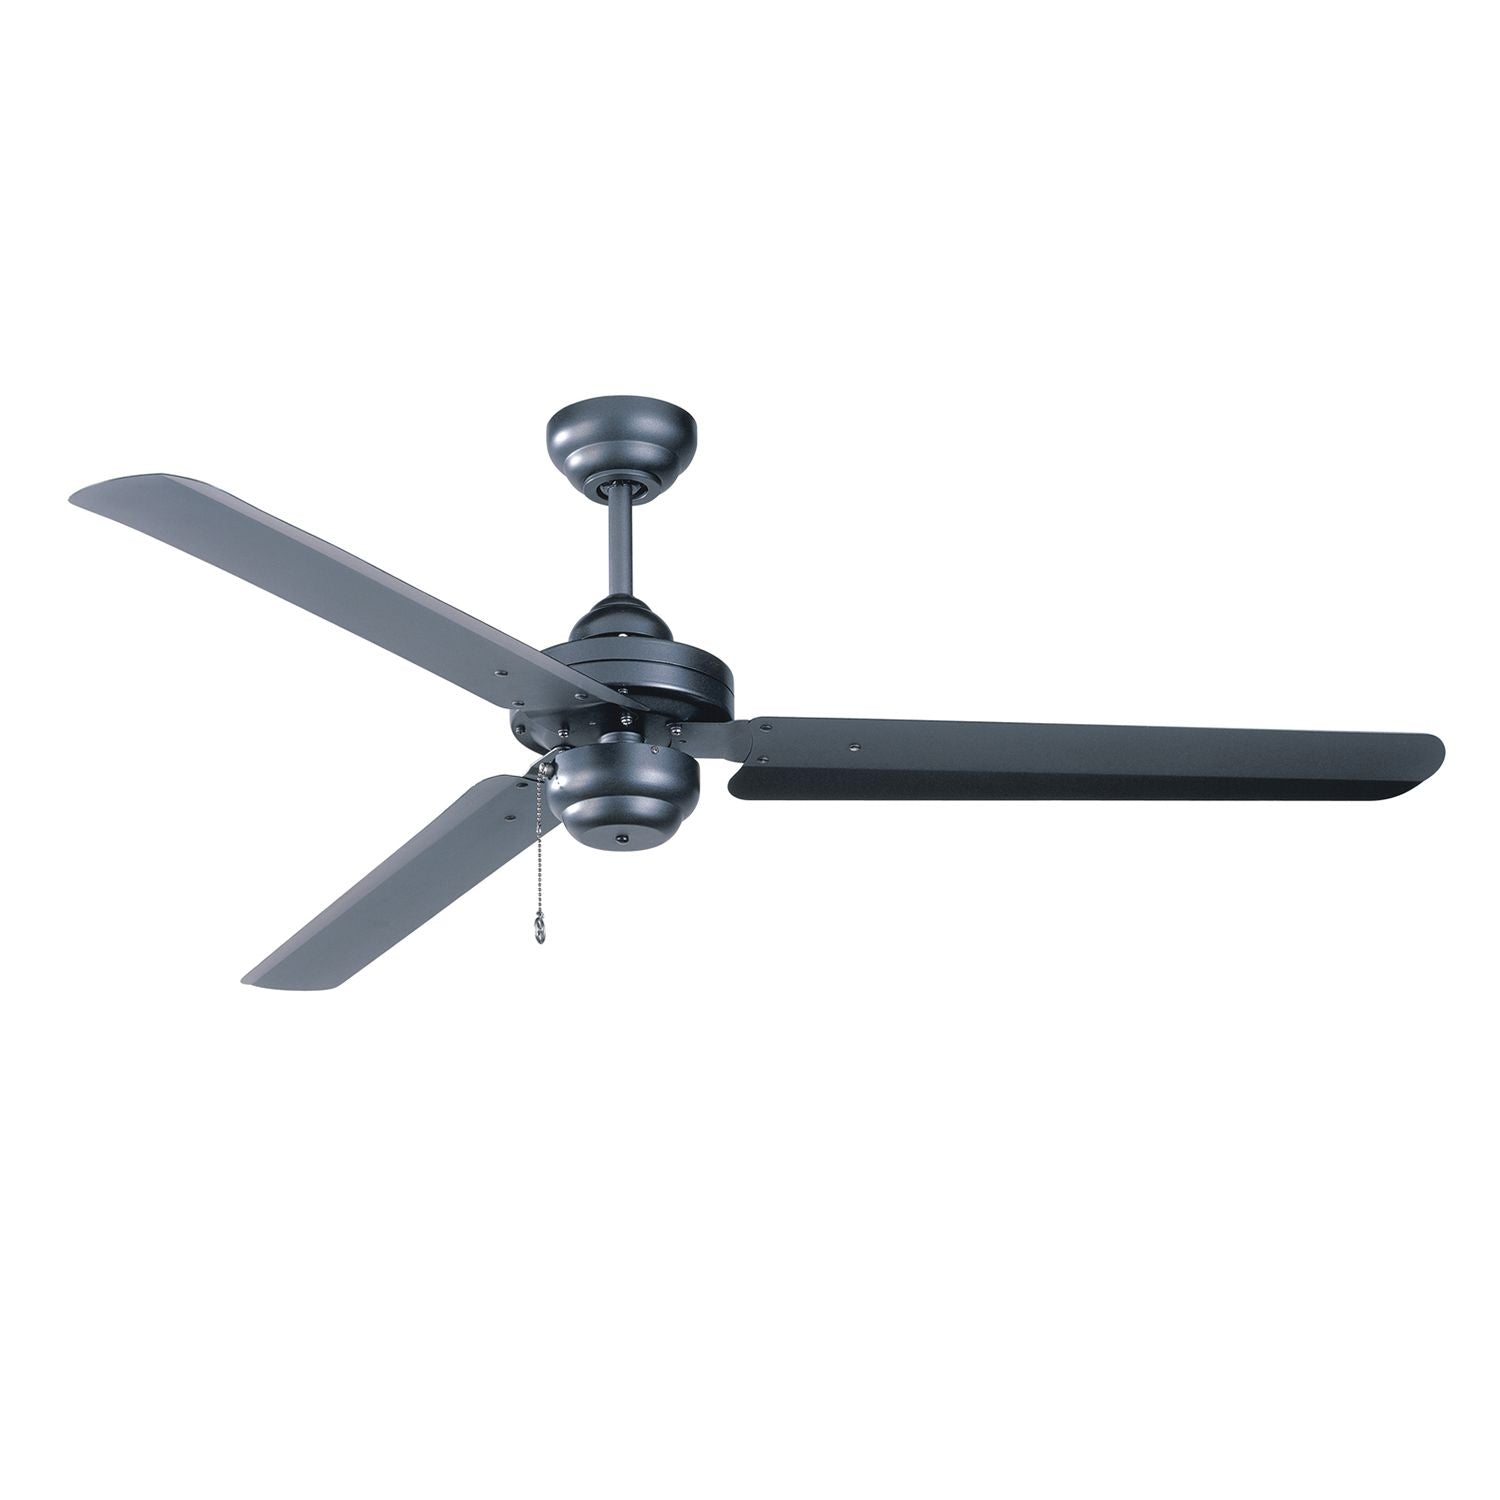 Studio 54 Ceiling Fan Natural Iron with matching blades